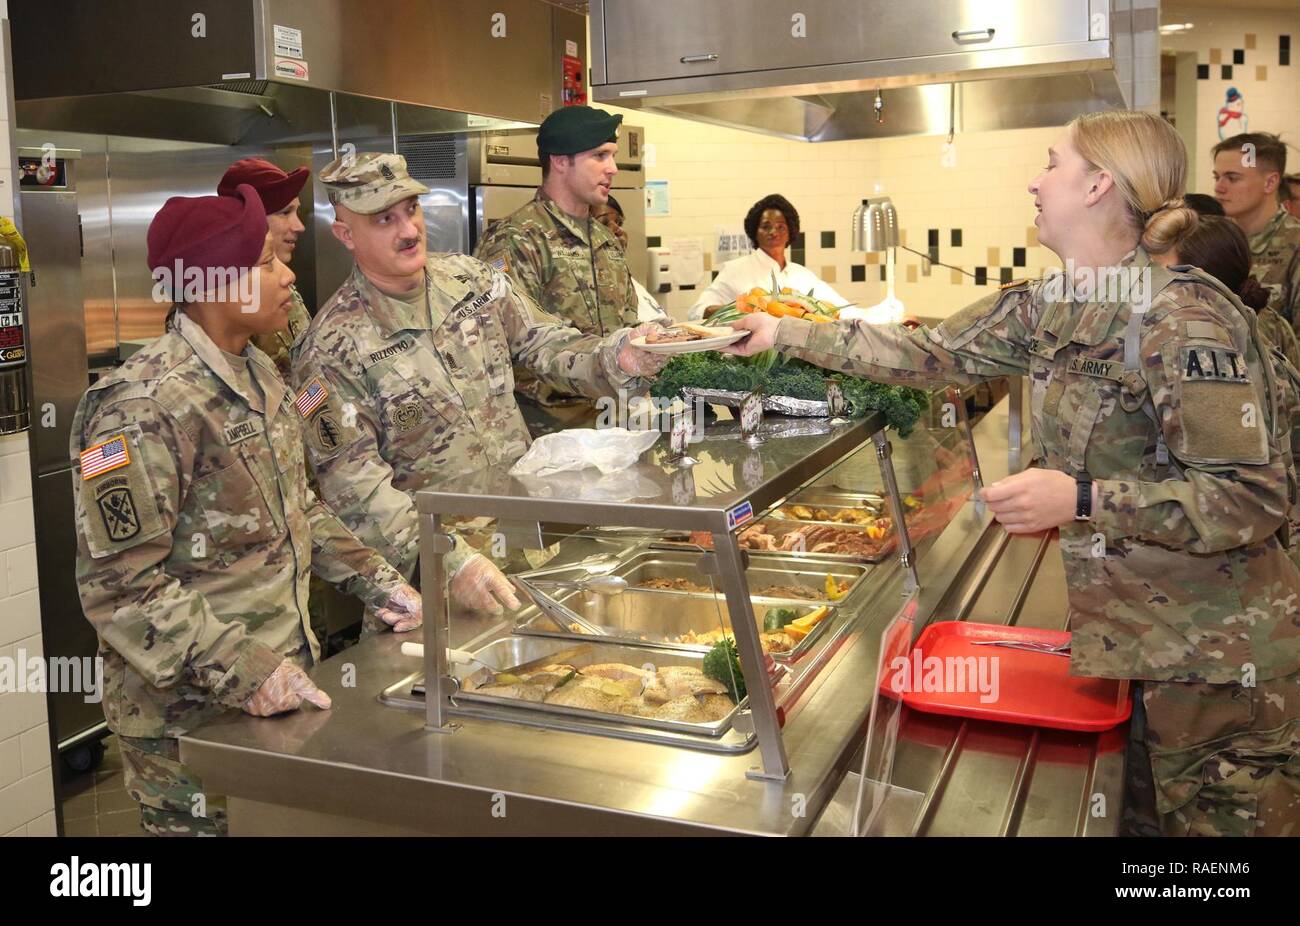 Major Natasha Campbell, executive officer, 3rd Battalion, 1st Special Warfare Training Group (Airborne), left, Command Sgt. Maj. Steve Rizzotto, command sergeant major, 3rd Battalion, 1st Special Warfare Training Group (Airborne), center, and Maj. Nick Williams, operations officer, Special Warfare Medical Group (Airborne) serves Soldiers during a holiday lunch at the U.S. Army Special Warfare Center and School Dining Facility, Fort Bragg, North Carolina, on Dec. 13, 2018. The DFAC personnel prepared a special lunch served by leadership prior to holiday leave. Stock Photo